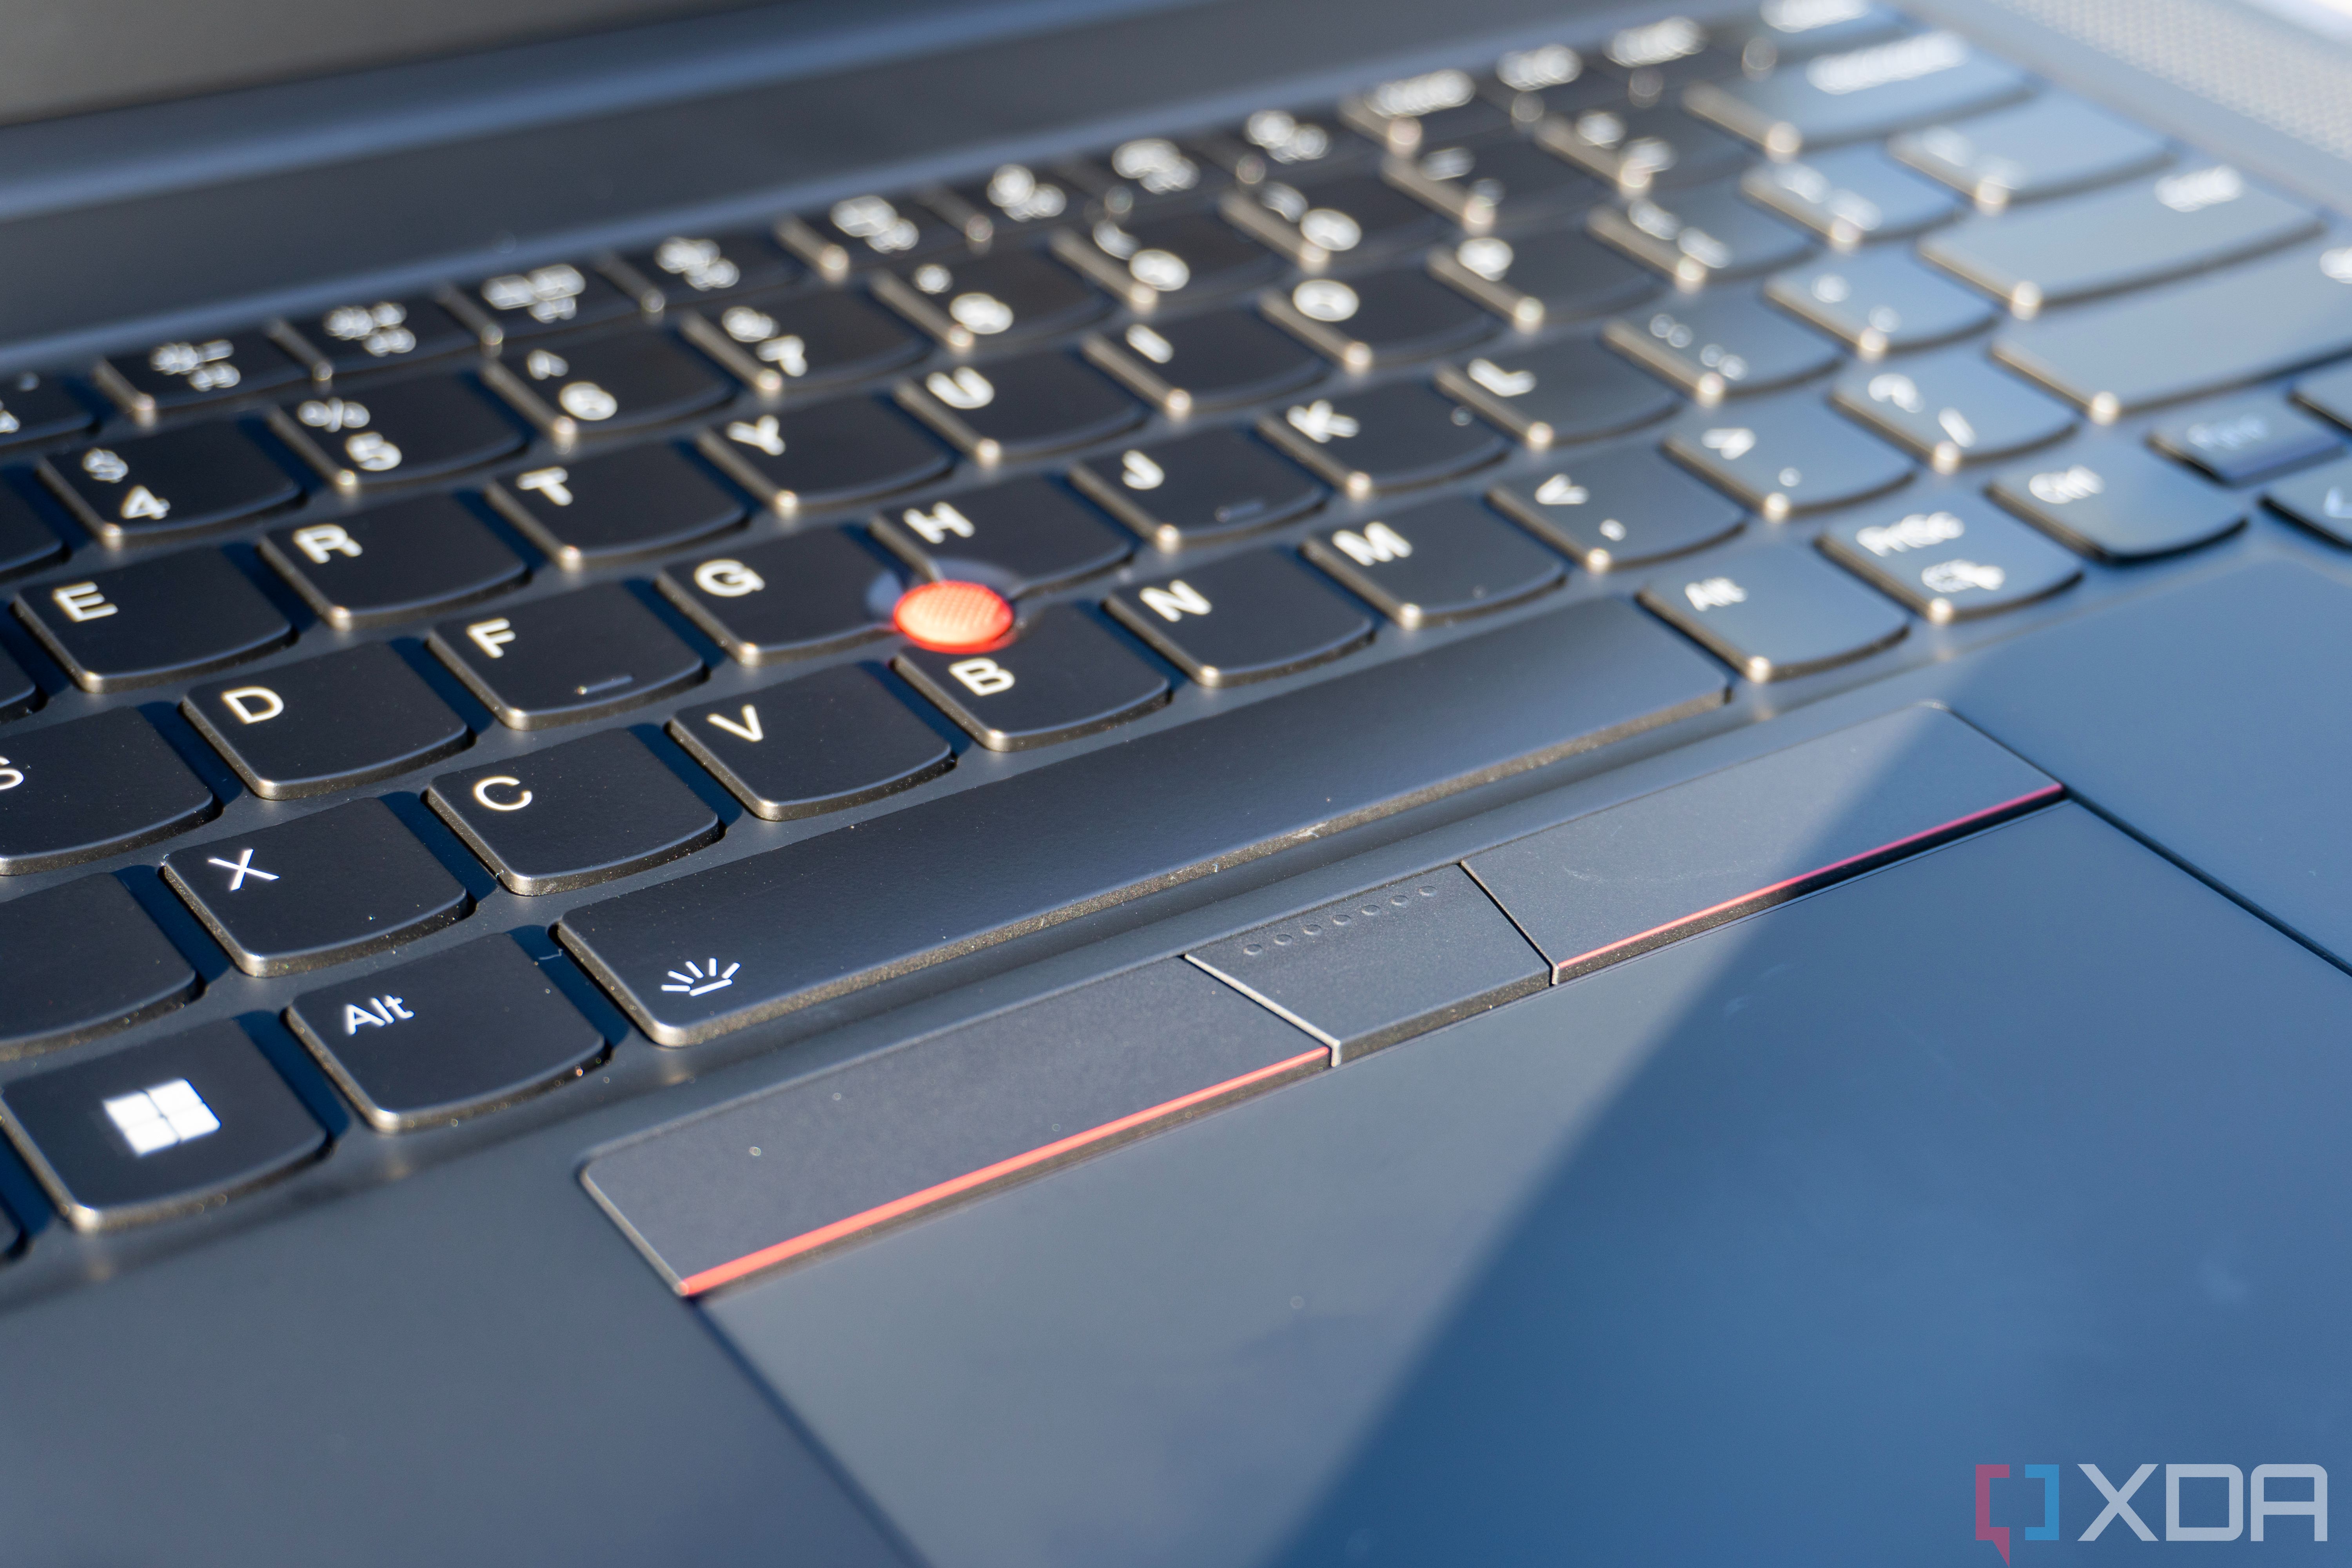 Close-up view of the mouse buttons and red TrackPoint on the Lenovo ThinkPad X1 Extreme Gen 5